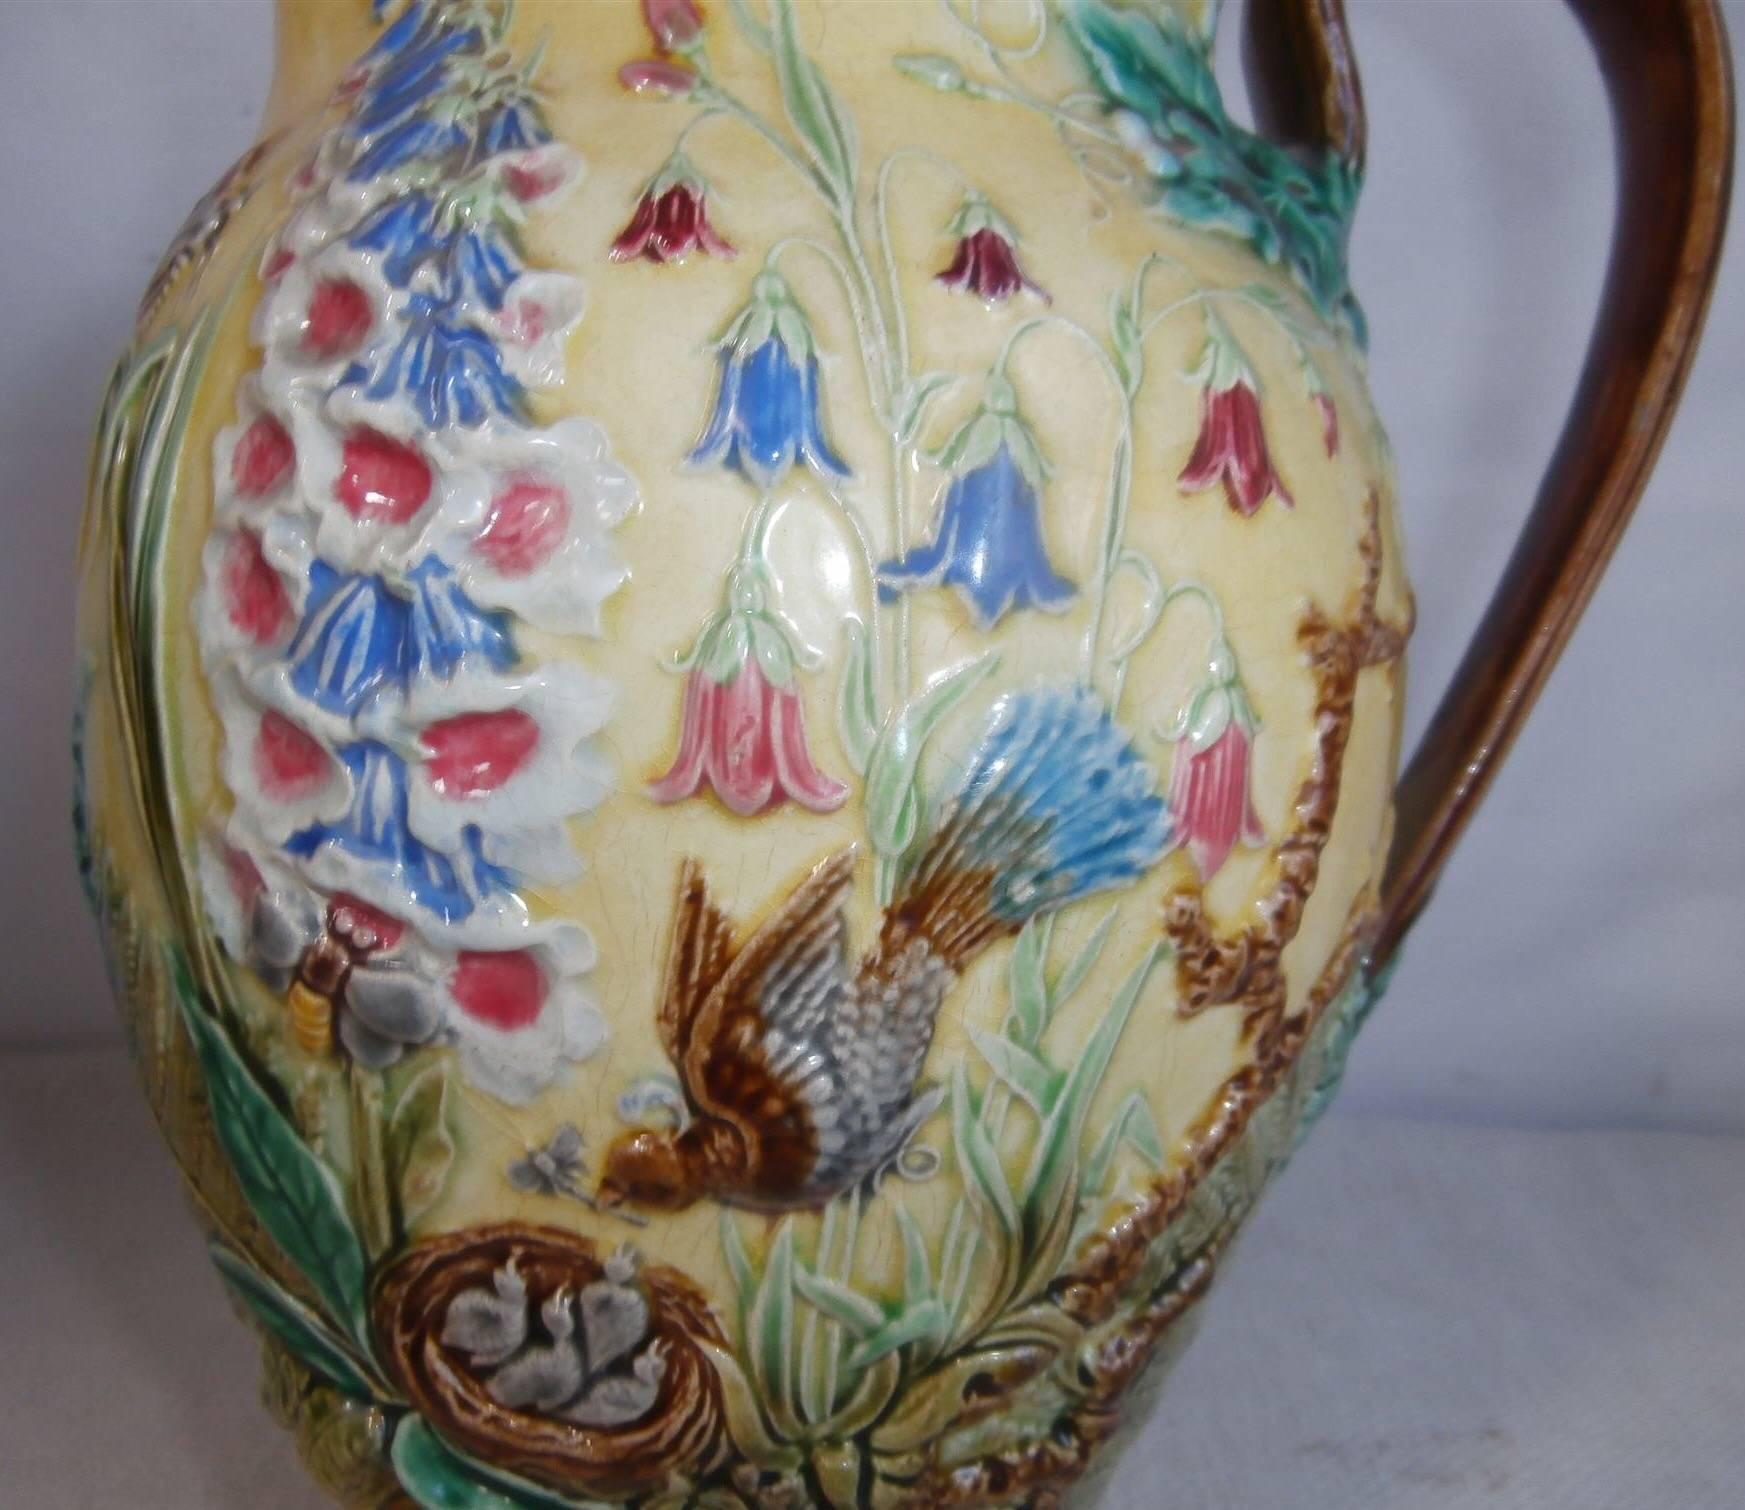 Rare Majolica pitcher decorated with differents patterns on the two sides, one side with bird, lily of the valley, morning glory and others greens leaves, the other side with floxgloves, butterflies, ferns, bird on nest circa 1870 (Manufacture of